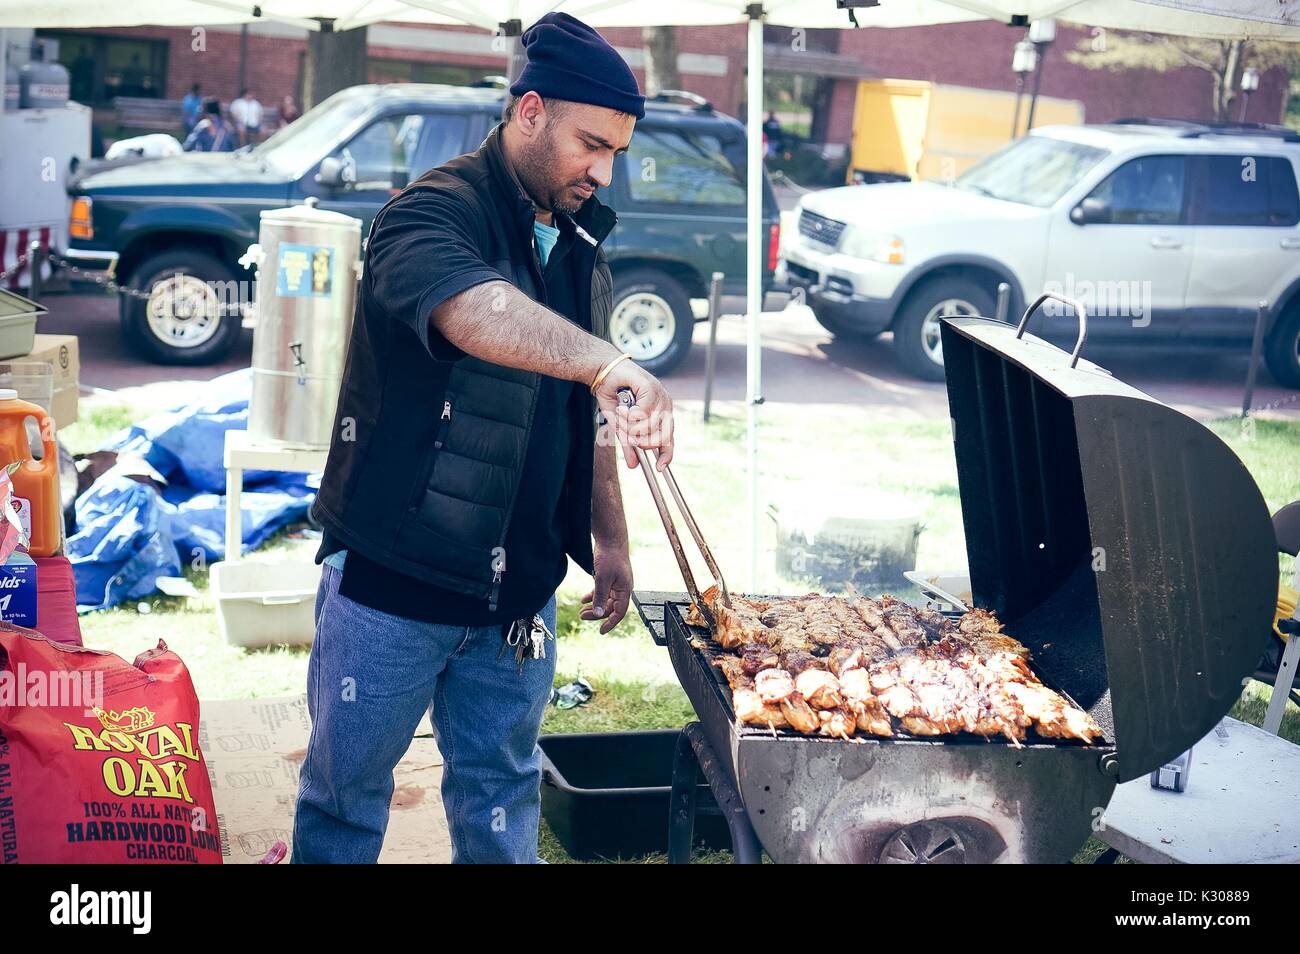 A man wearing beanie and vest stands in front of a grill, cooking chicken on skewers using large tongs, at a food booth during Spring Fair, a student-run spring carnival at Johns Hopkins University, Baltimore, Maryland, April, 2016. Courtesy Eric Chen. Stock Photo